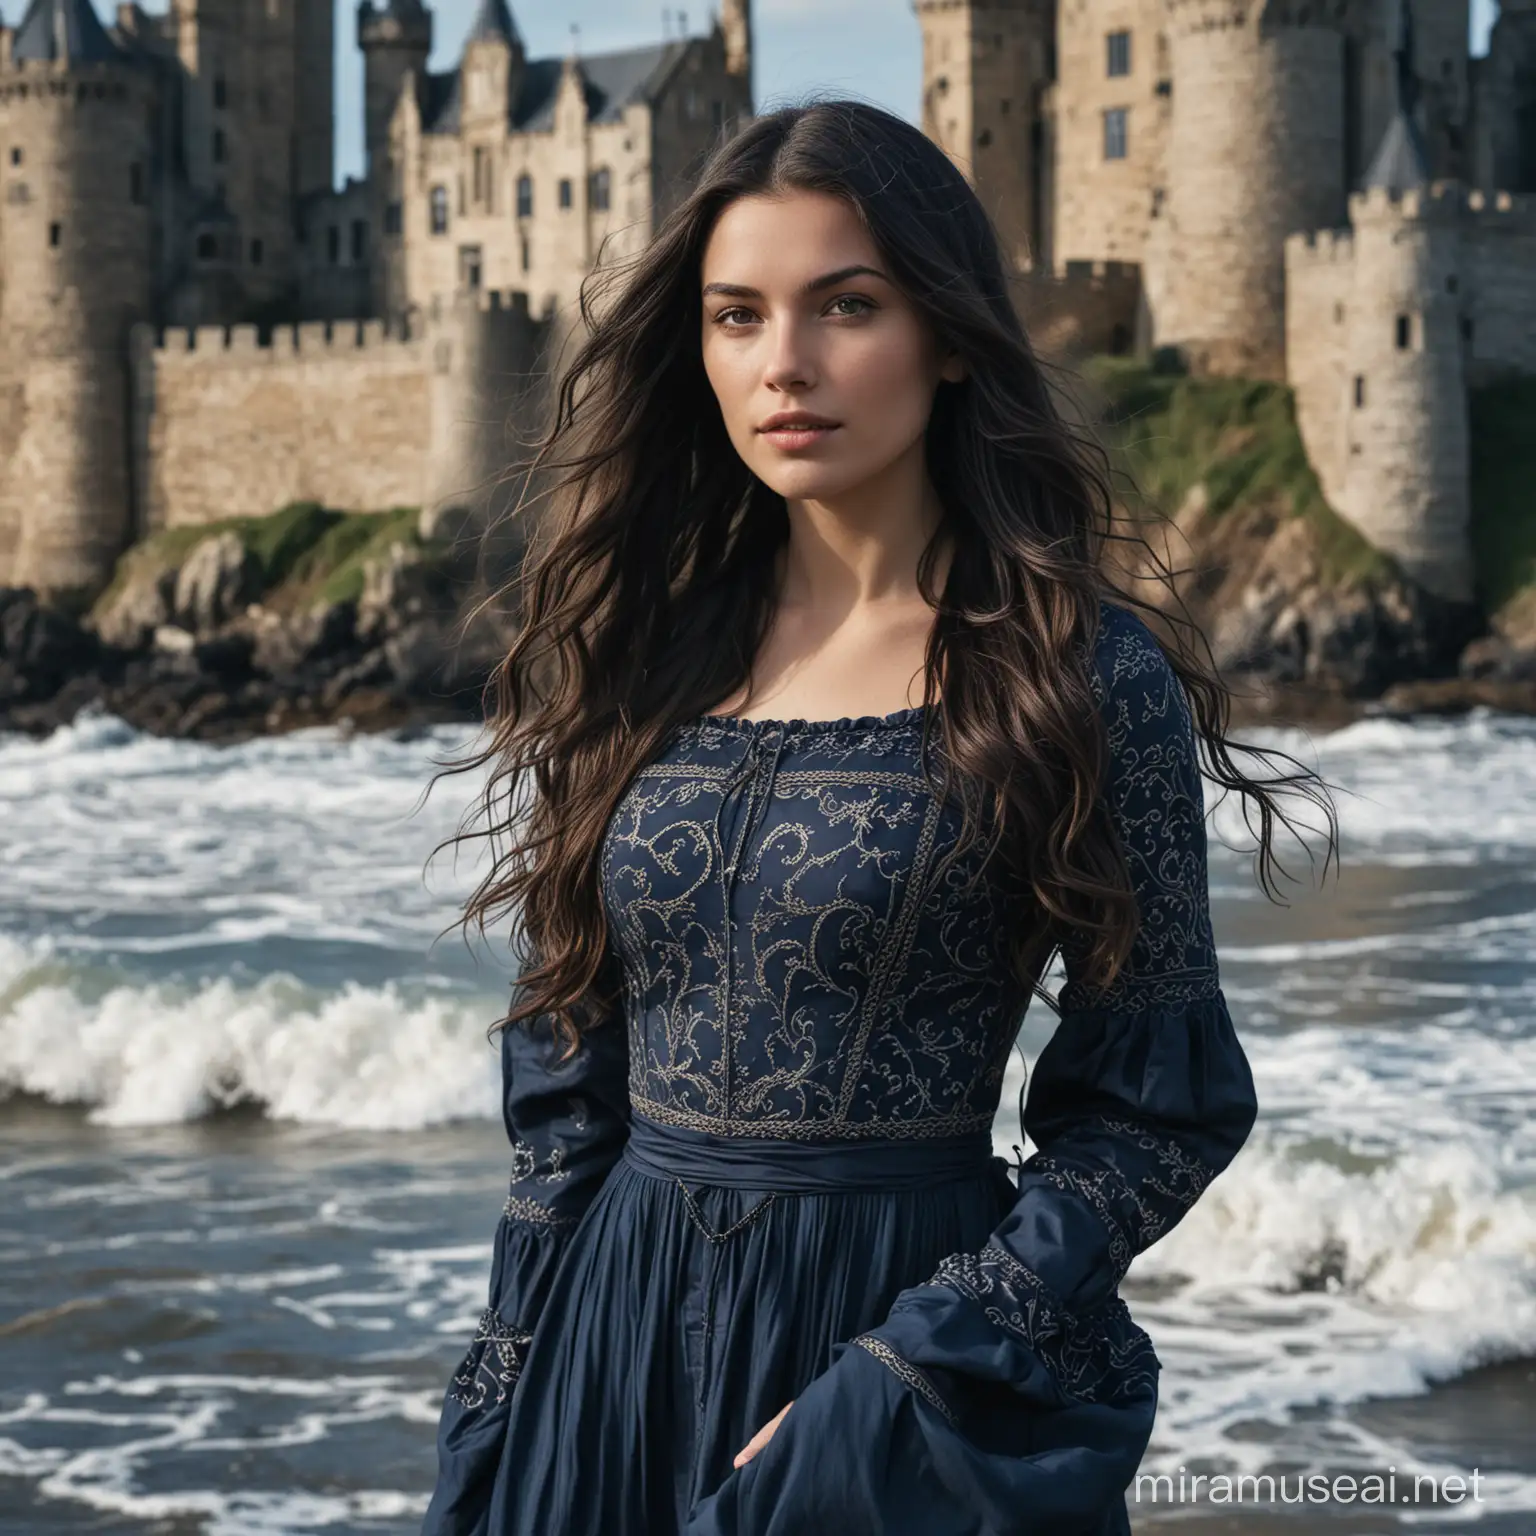 DarkHaired Woman in Medieval Blue Dress against Castle Backdrop